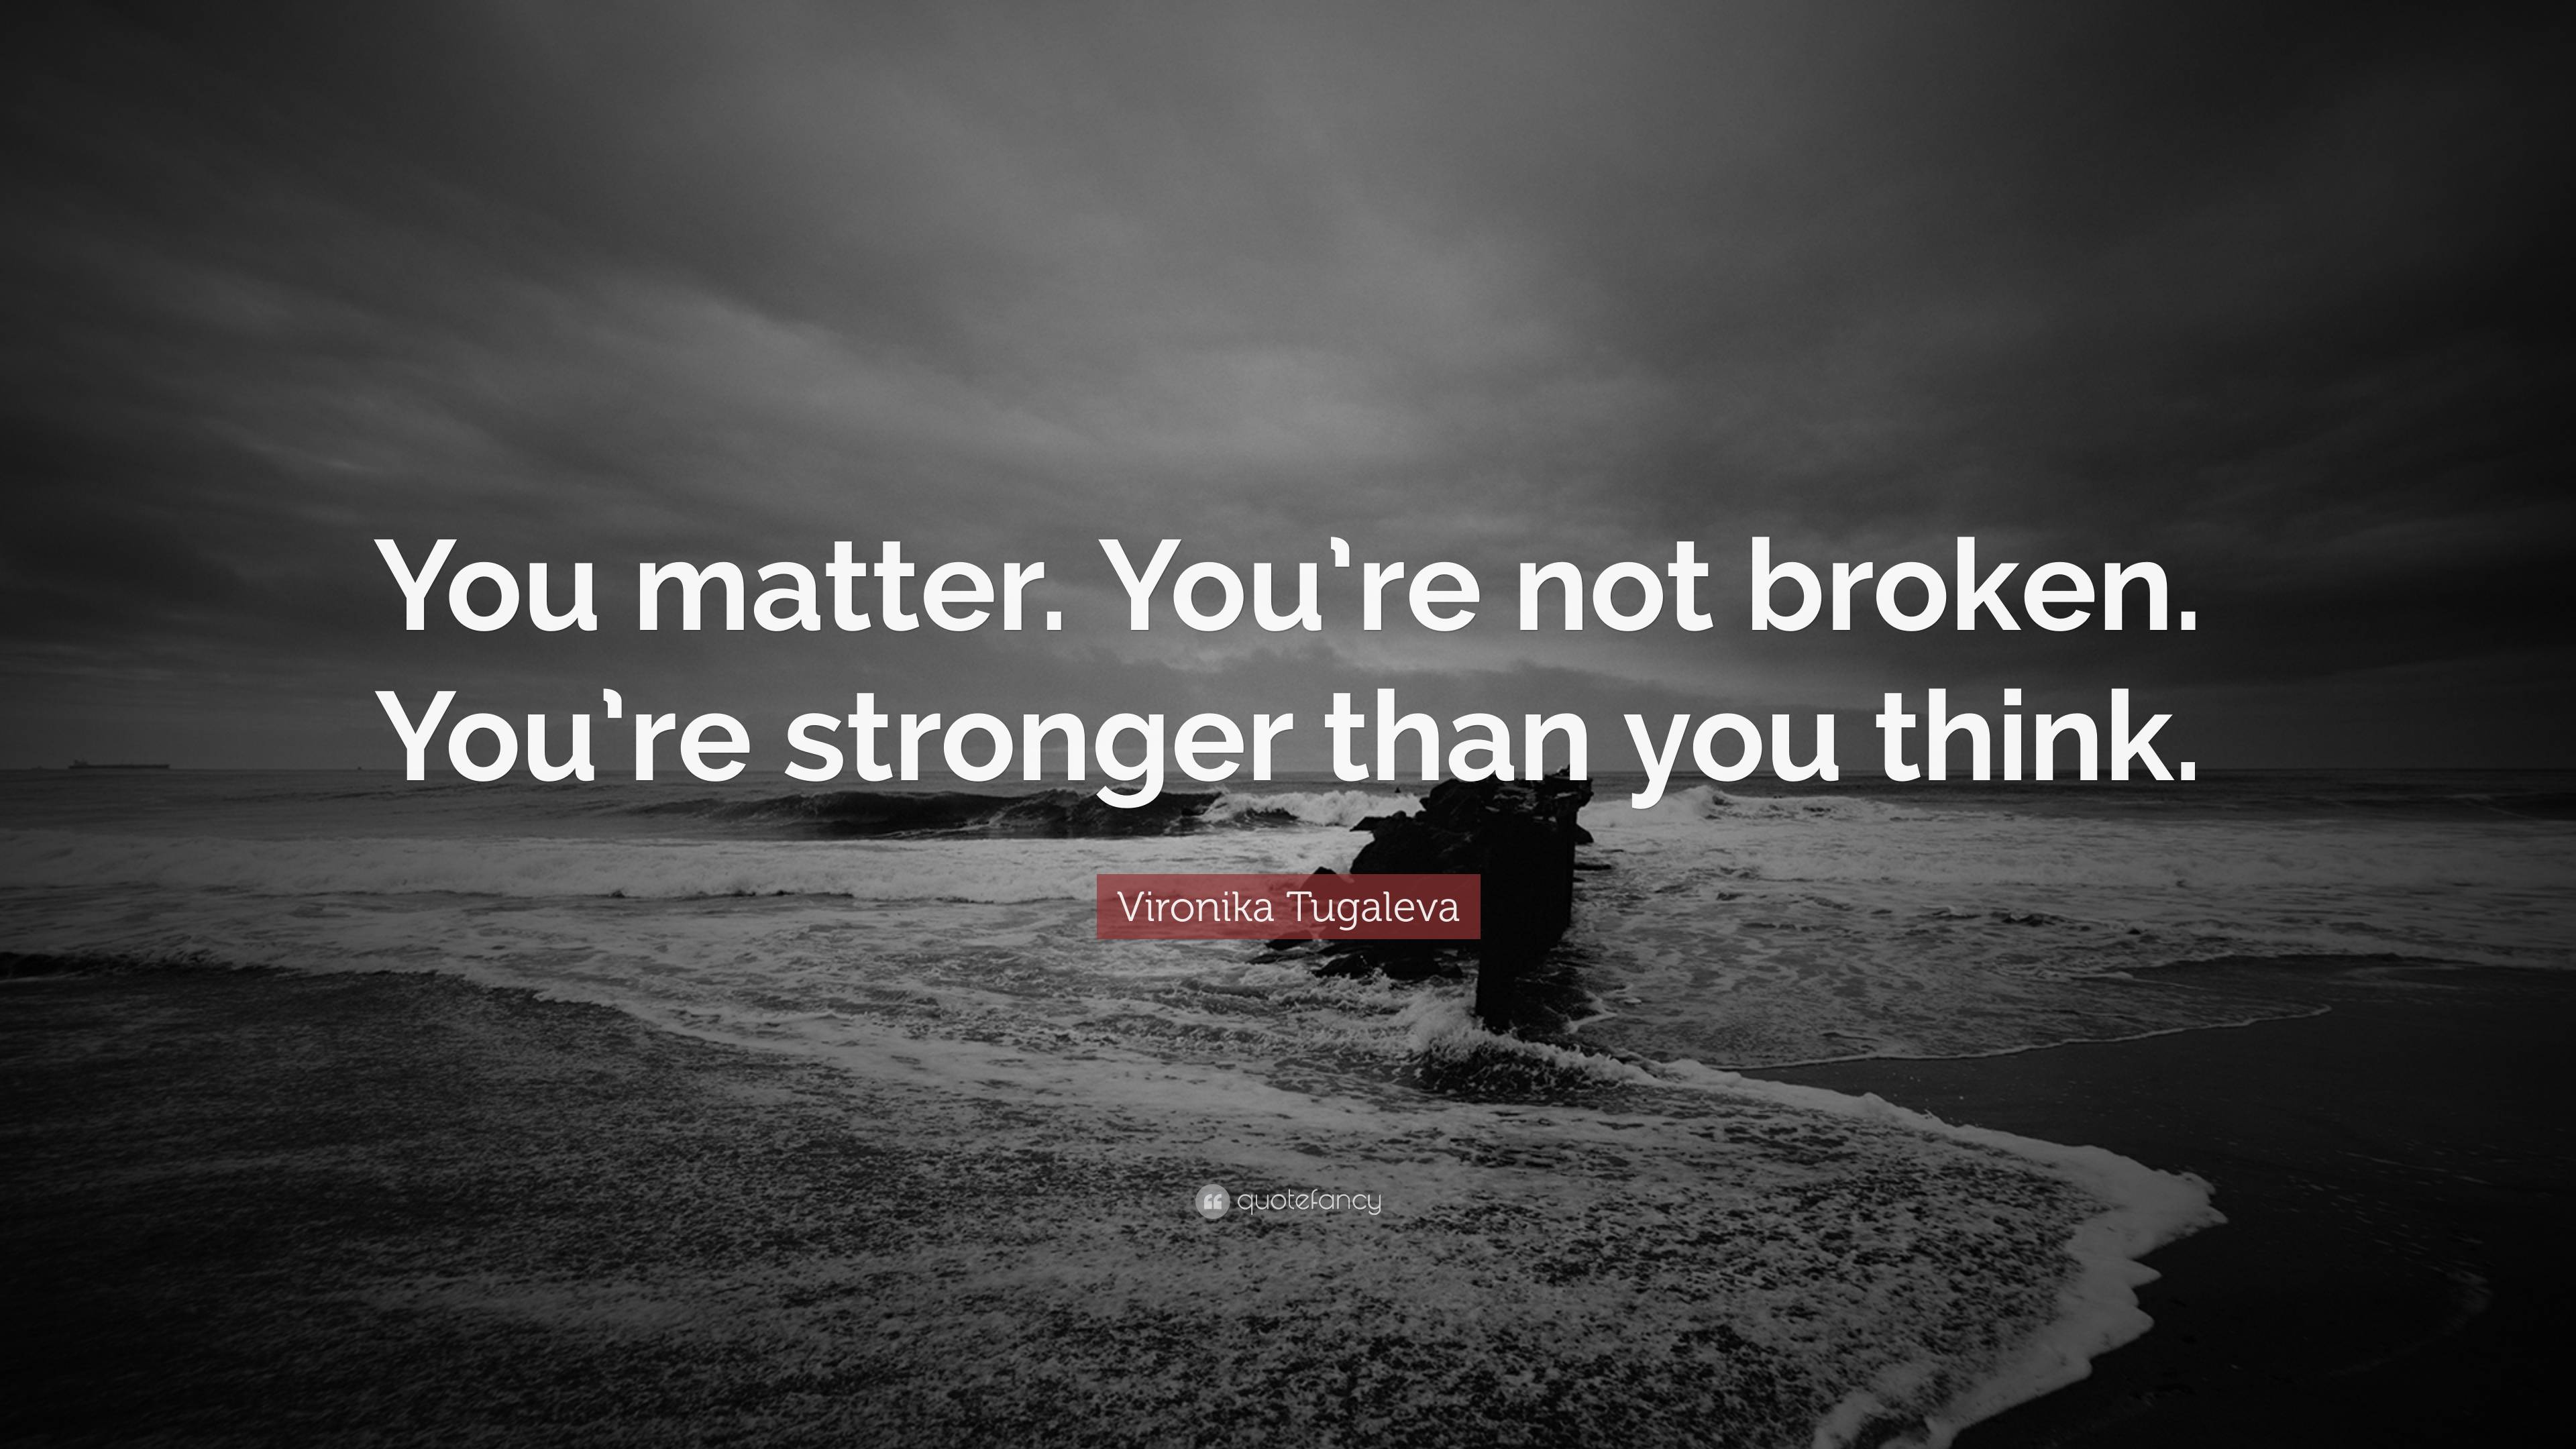 Vironika Tugaleva Quote: “You matter. You’re not broken. You’re ...